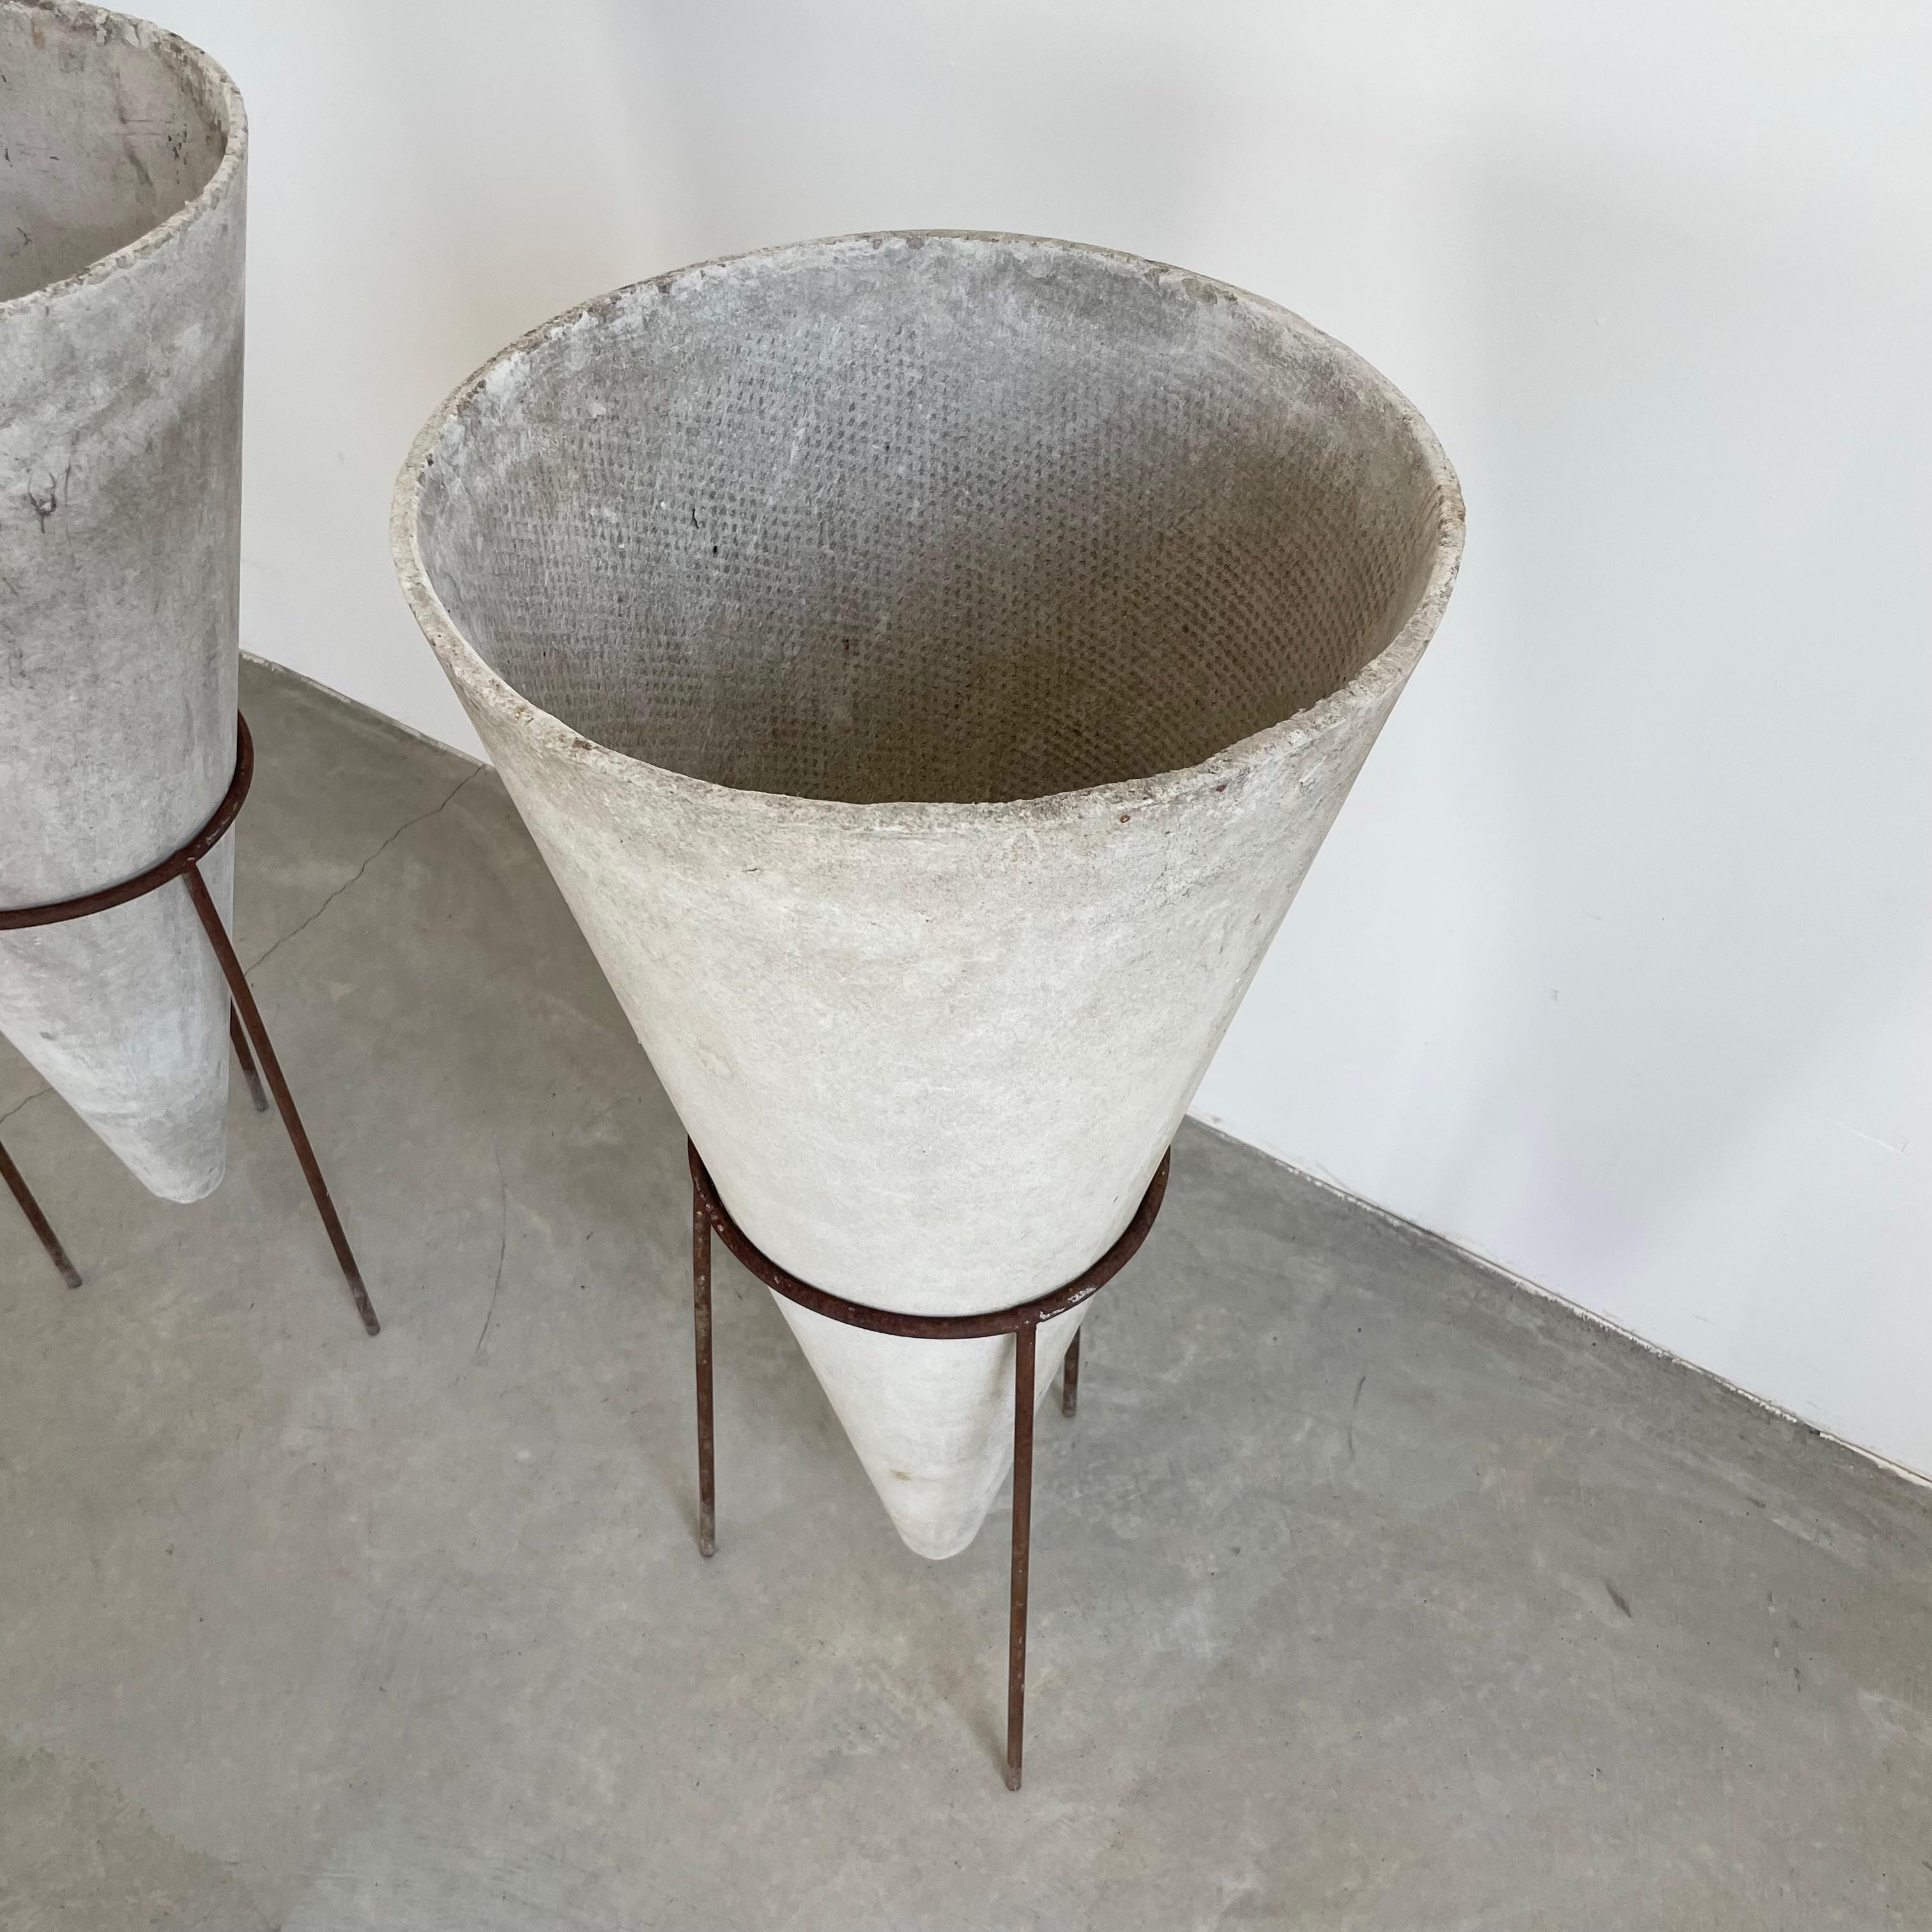 Willy Guhl Concrete Cone Planter on Iron Stand, 1960s 11